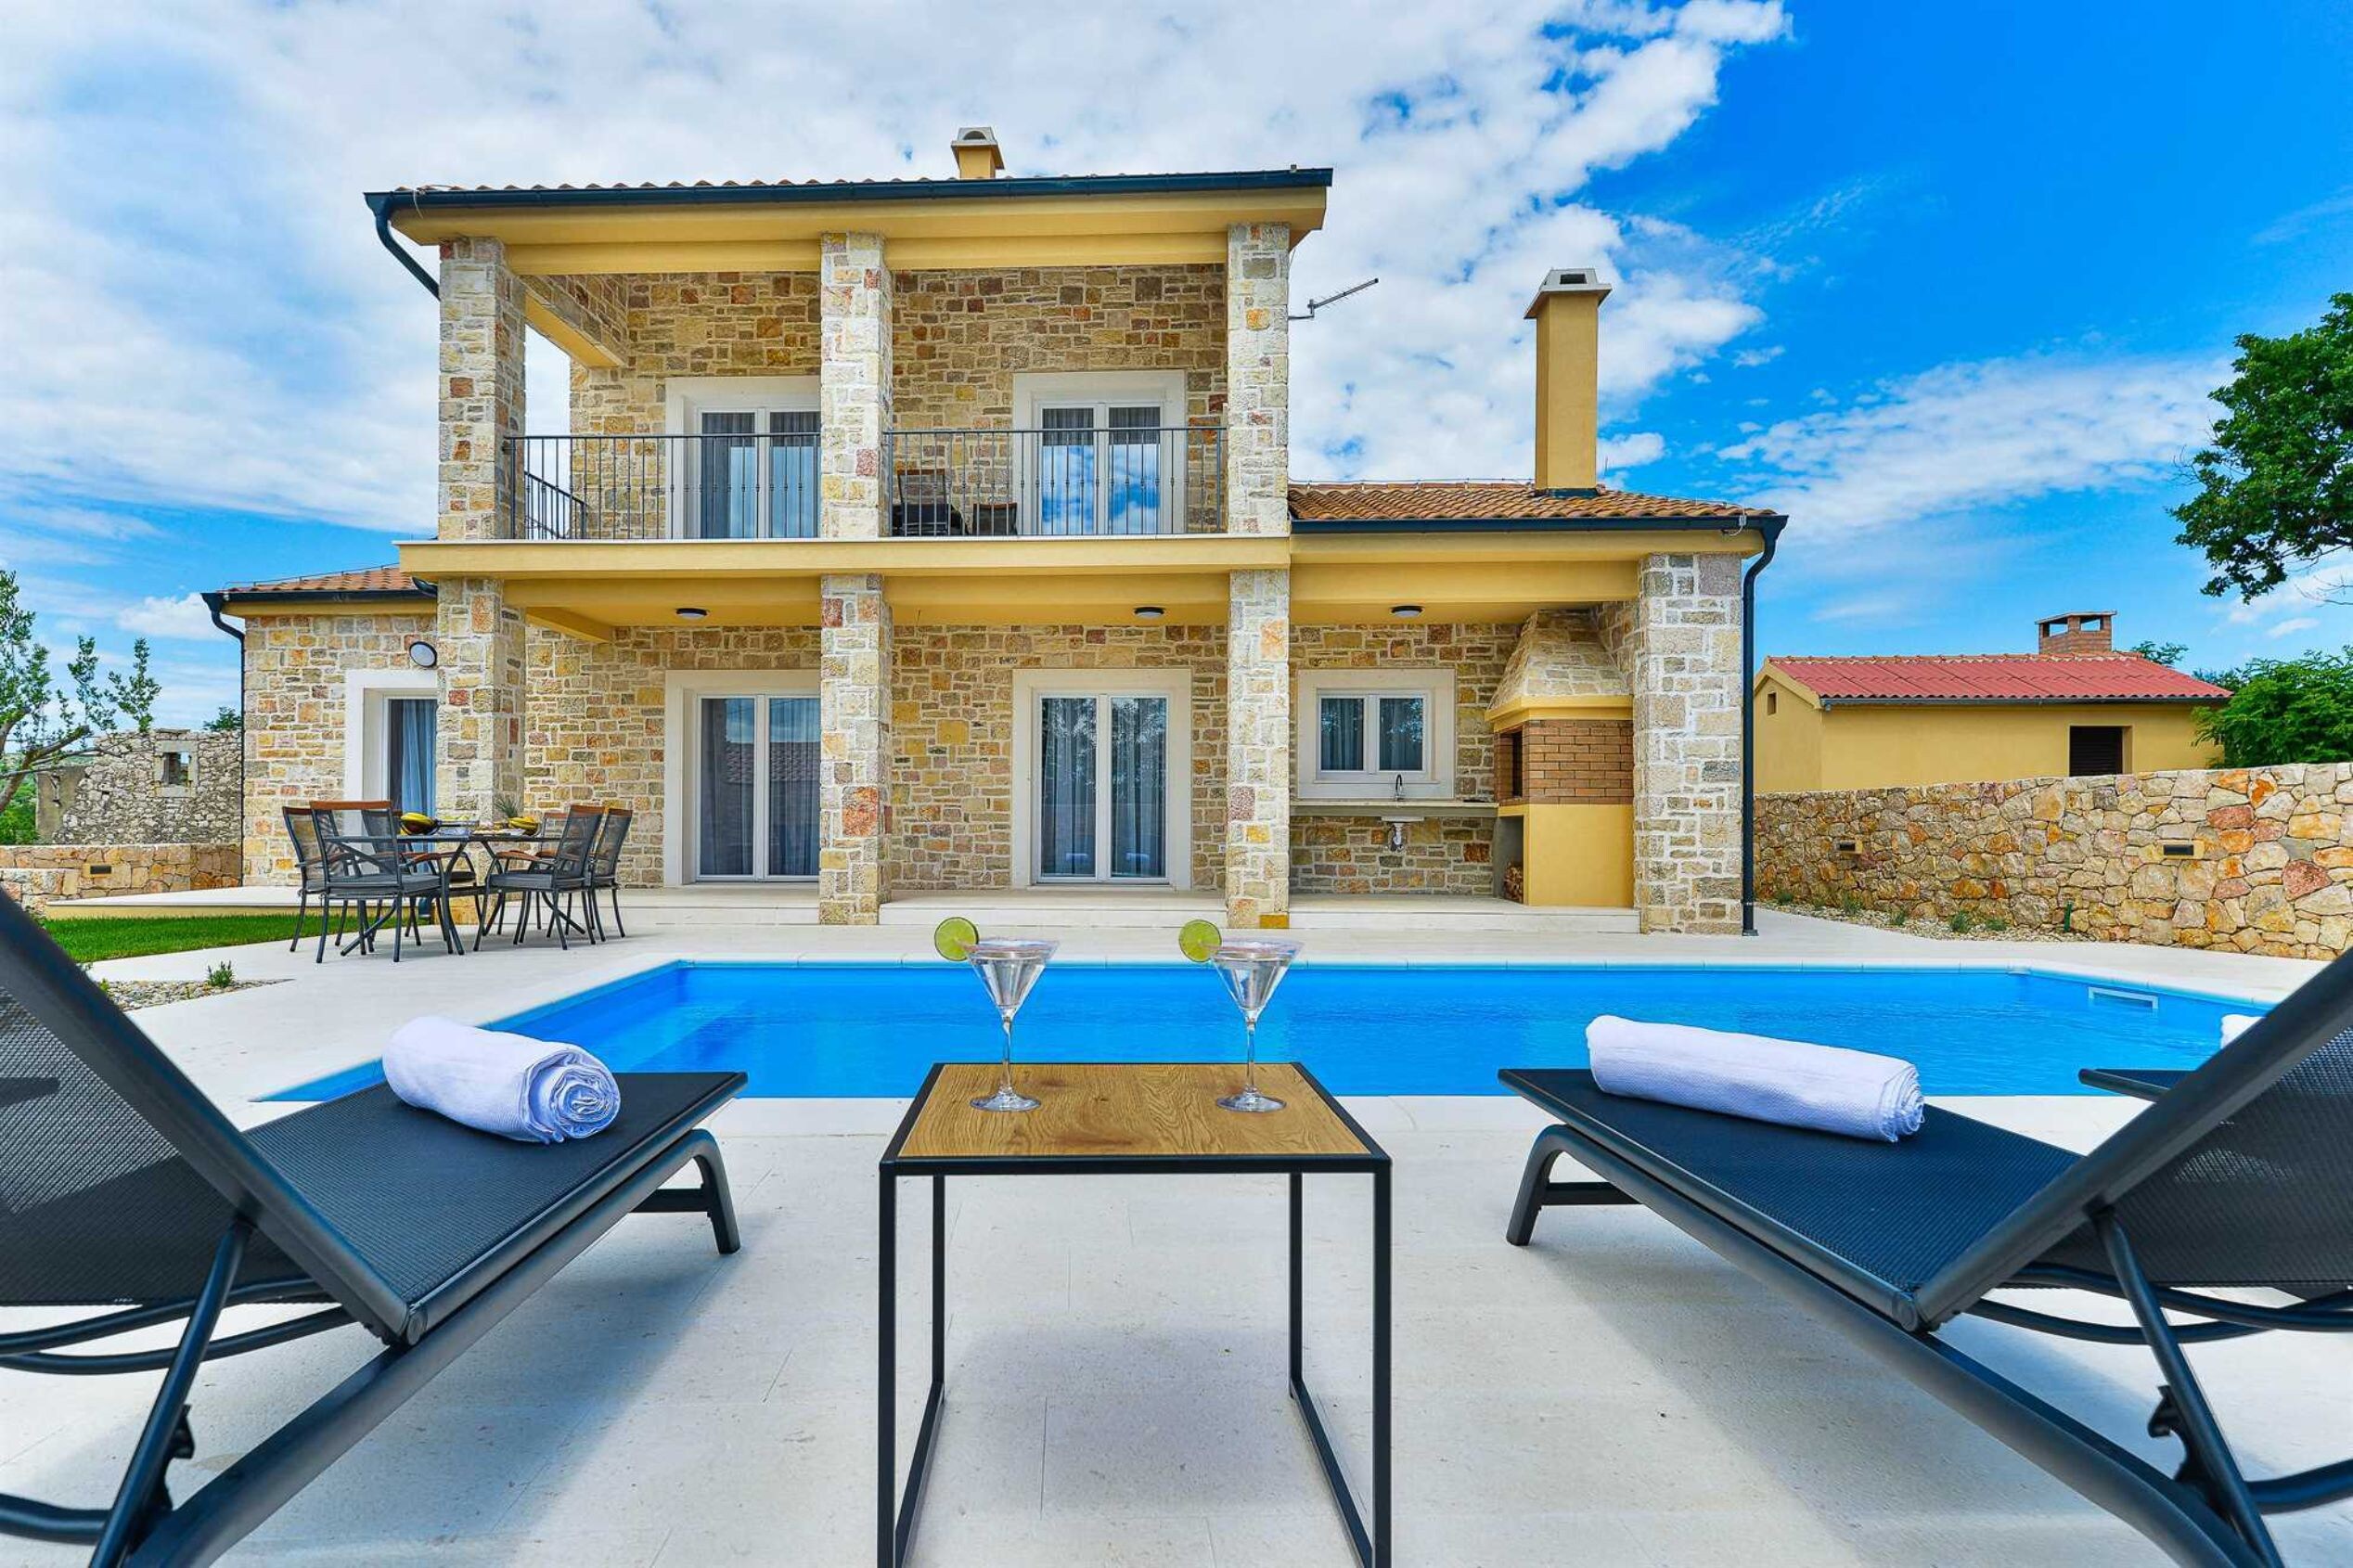 Modern Stone Villa with 1st floor adapted for wheelchair, outdoor kitchenette and barbecue grills, outdoor dining area and swimming pool